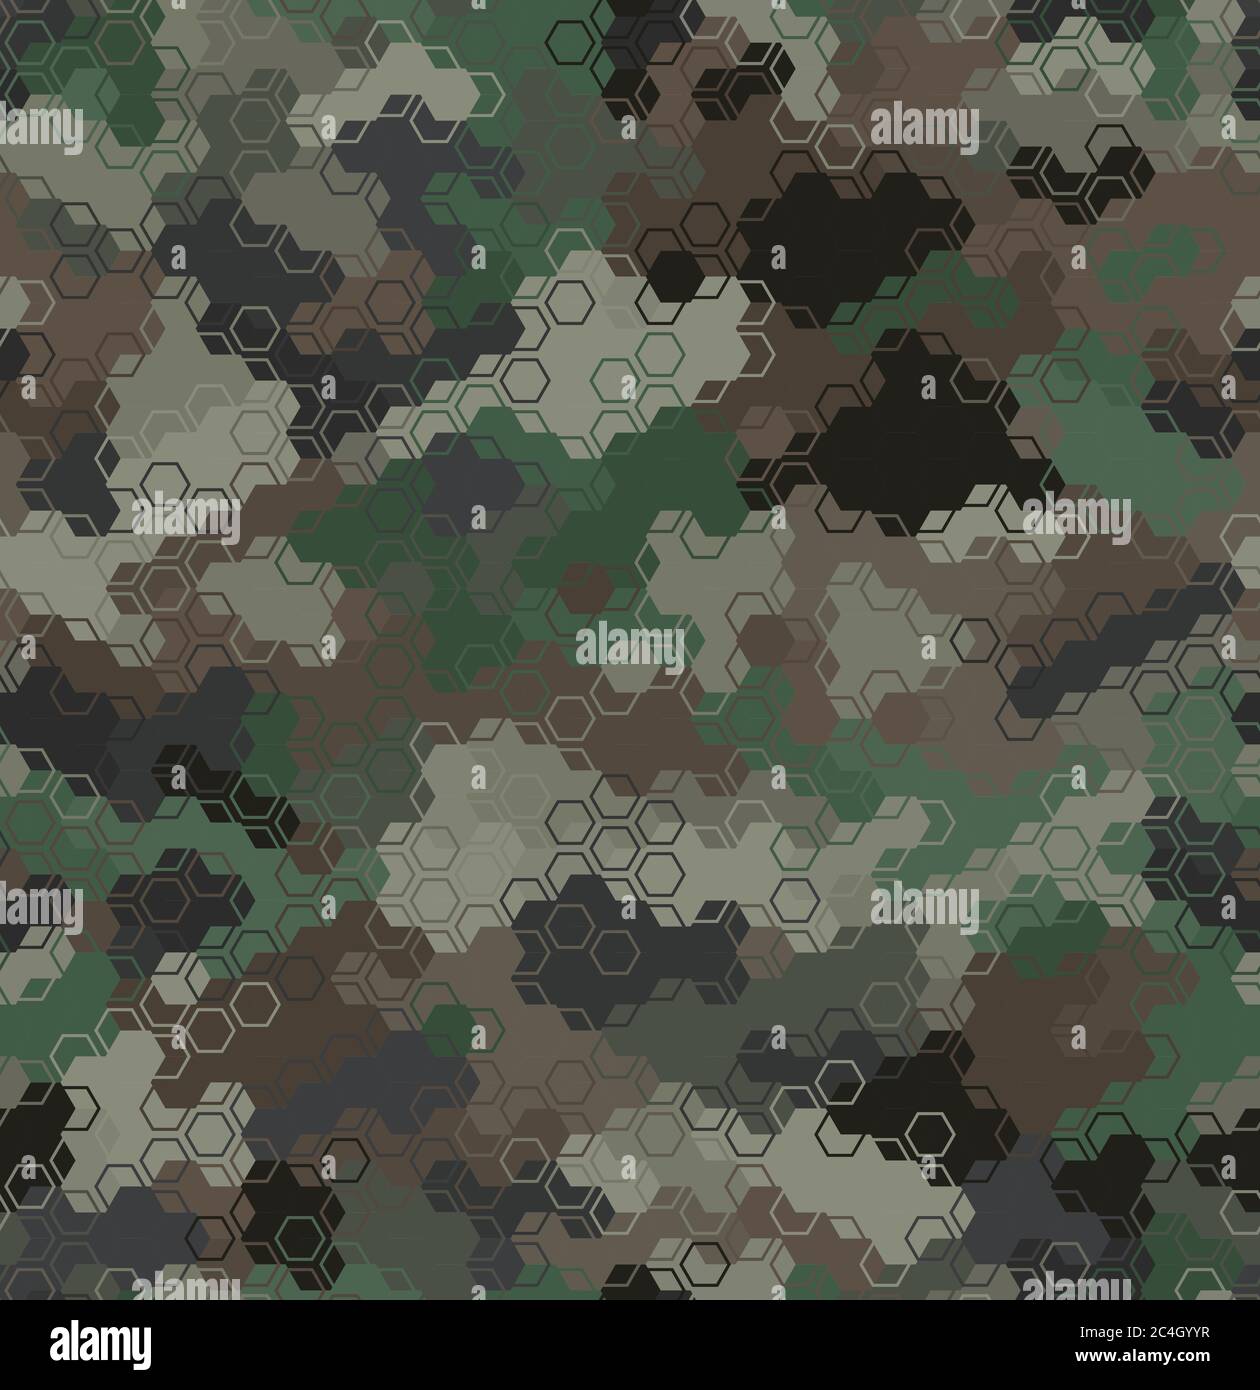 Texture military camouflage seamless pattern. Abstract army vector ...